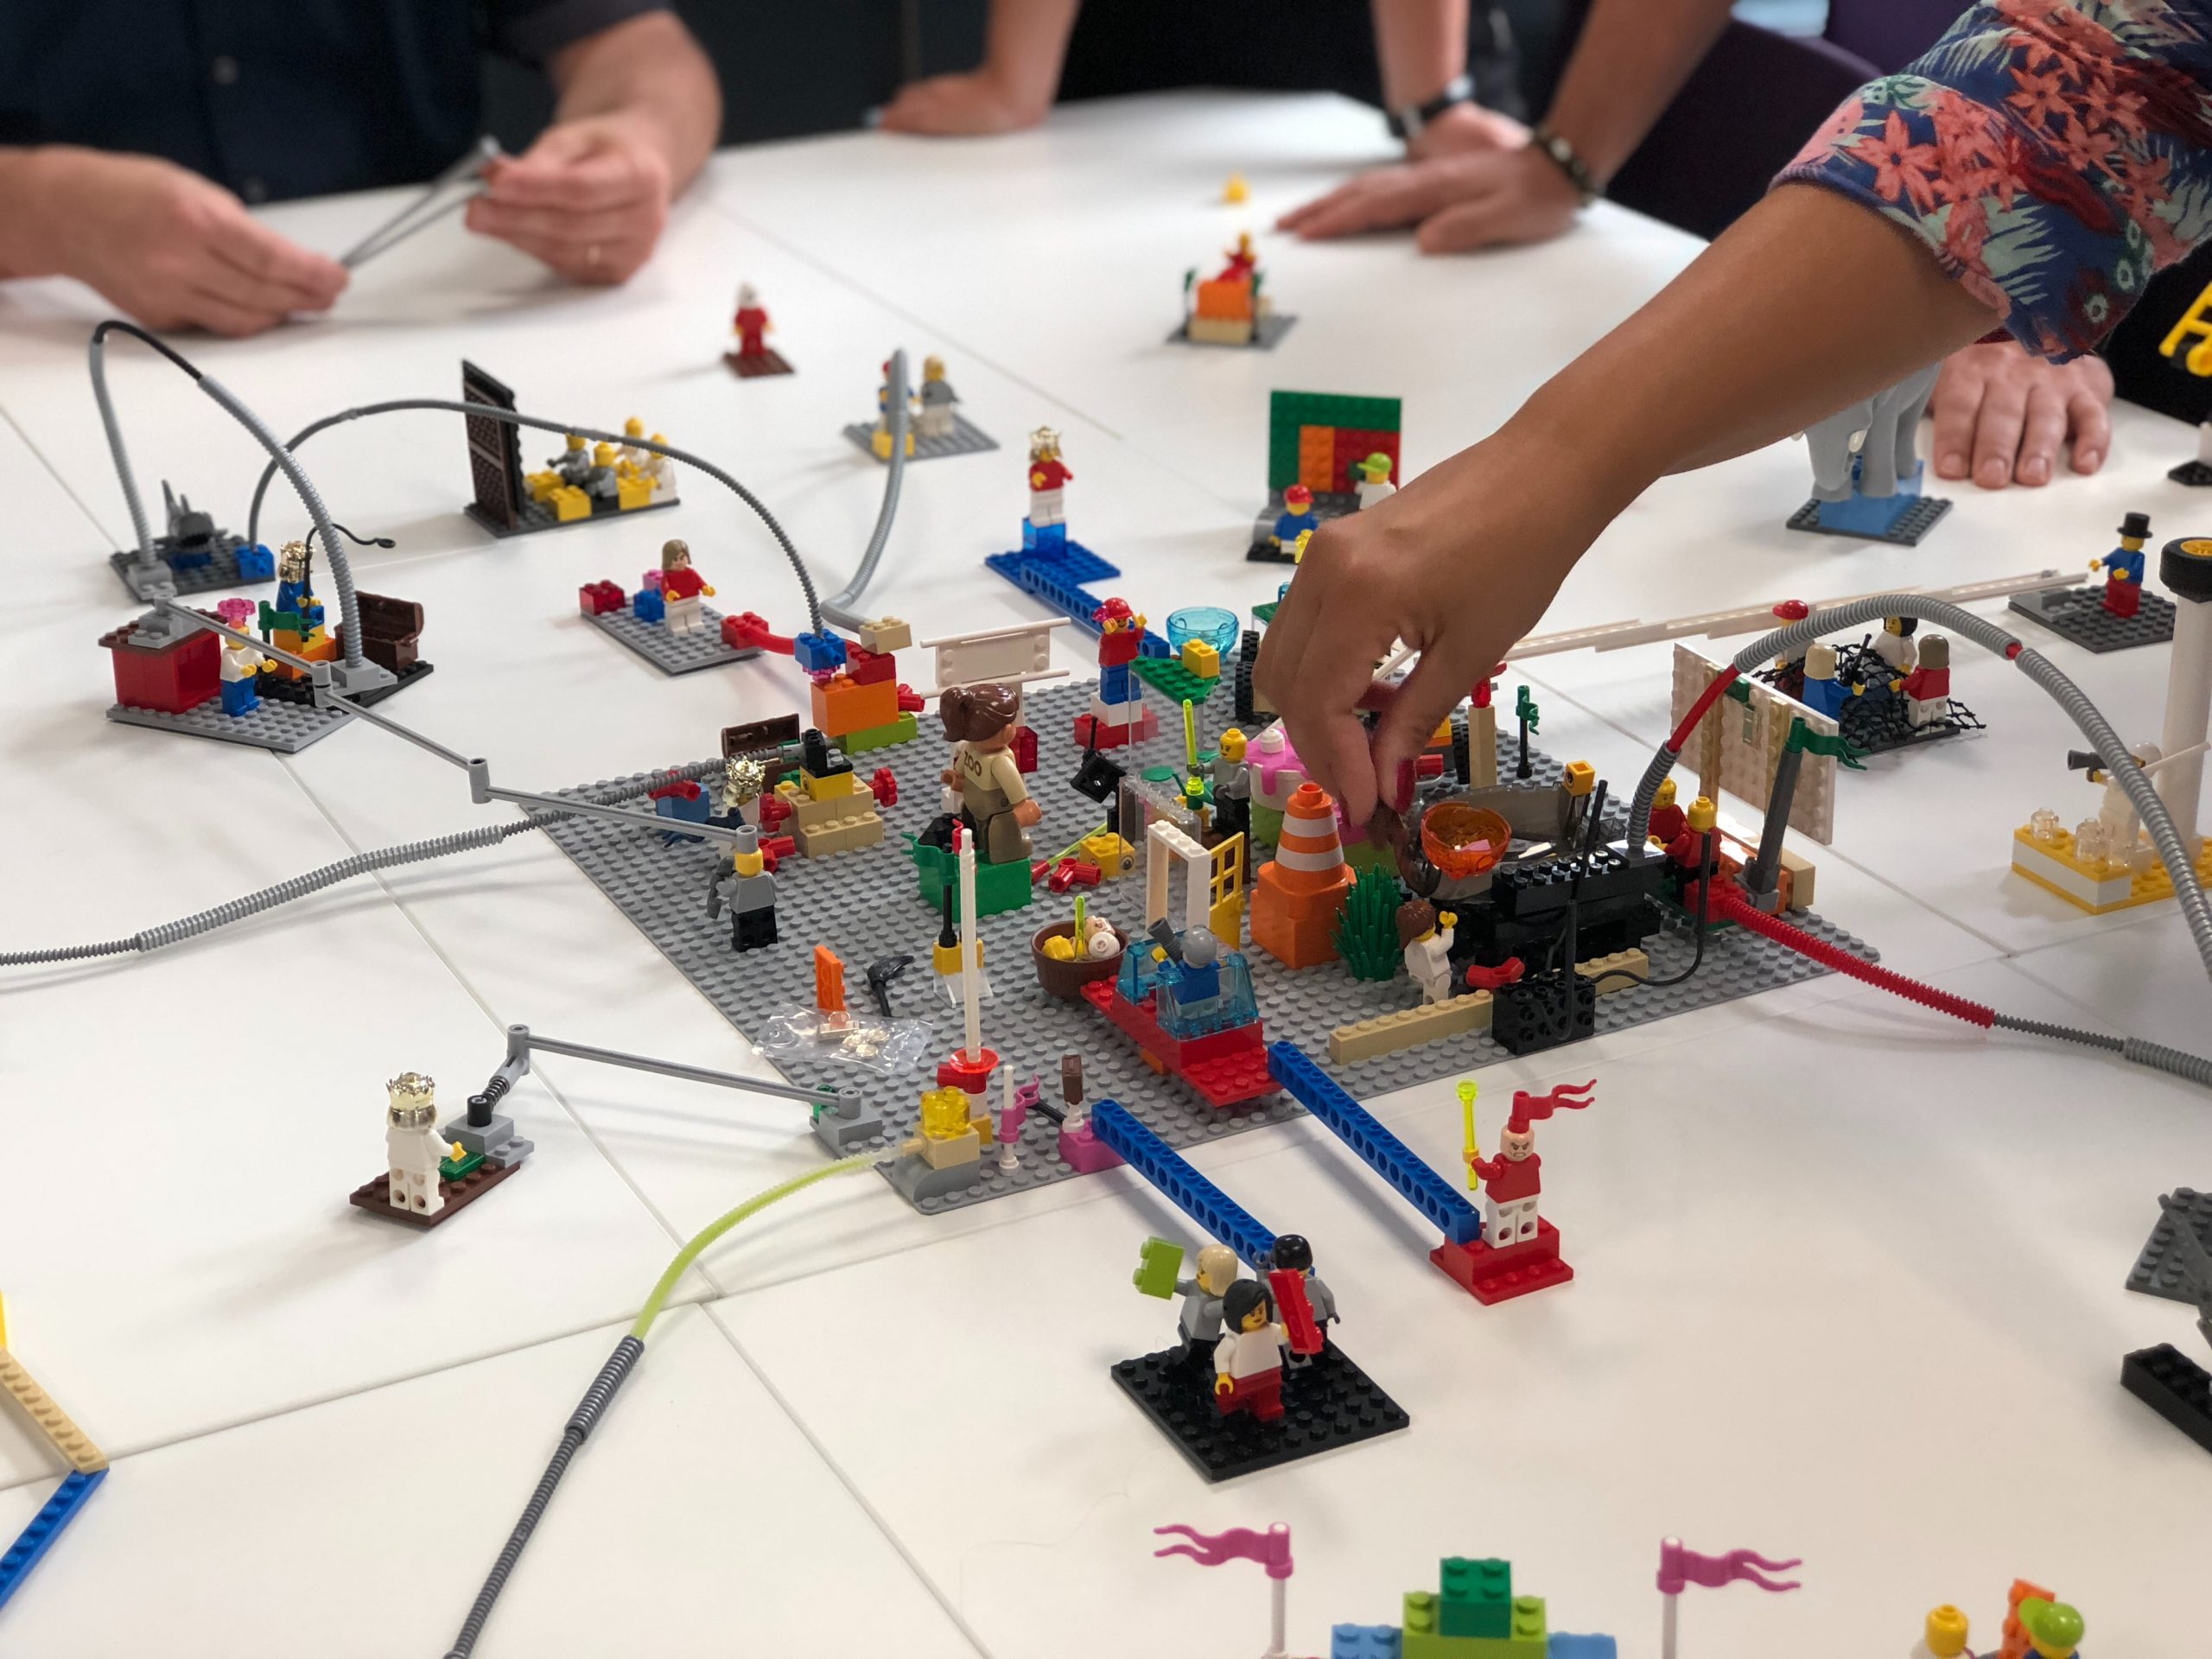 $10 million grant sees Foundation with The LEGO Foundation play